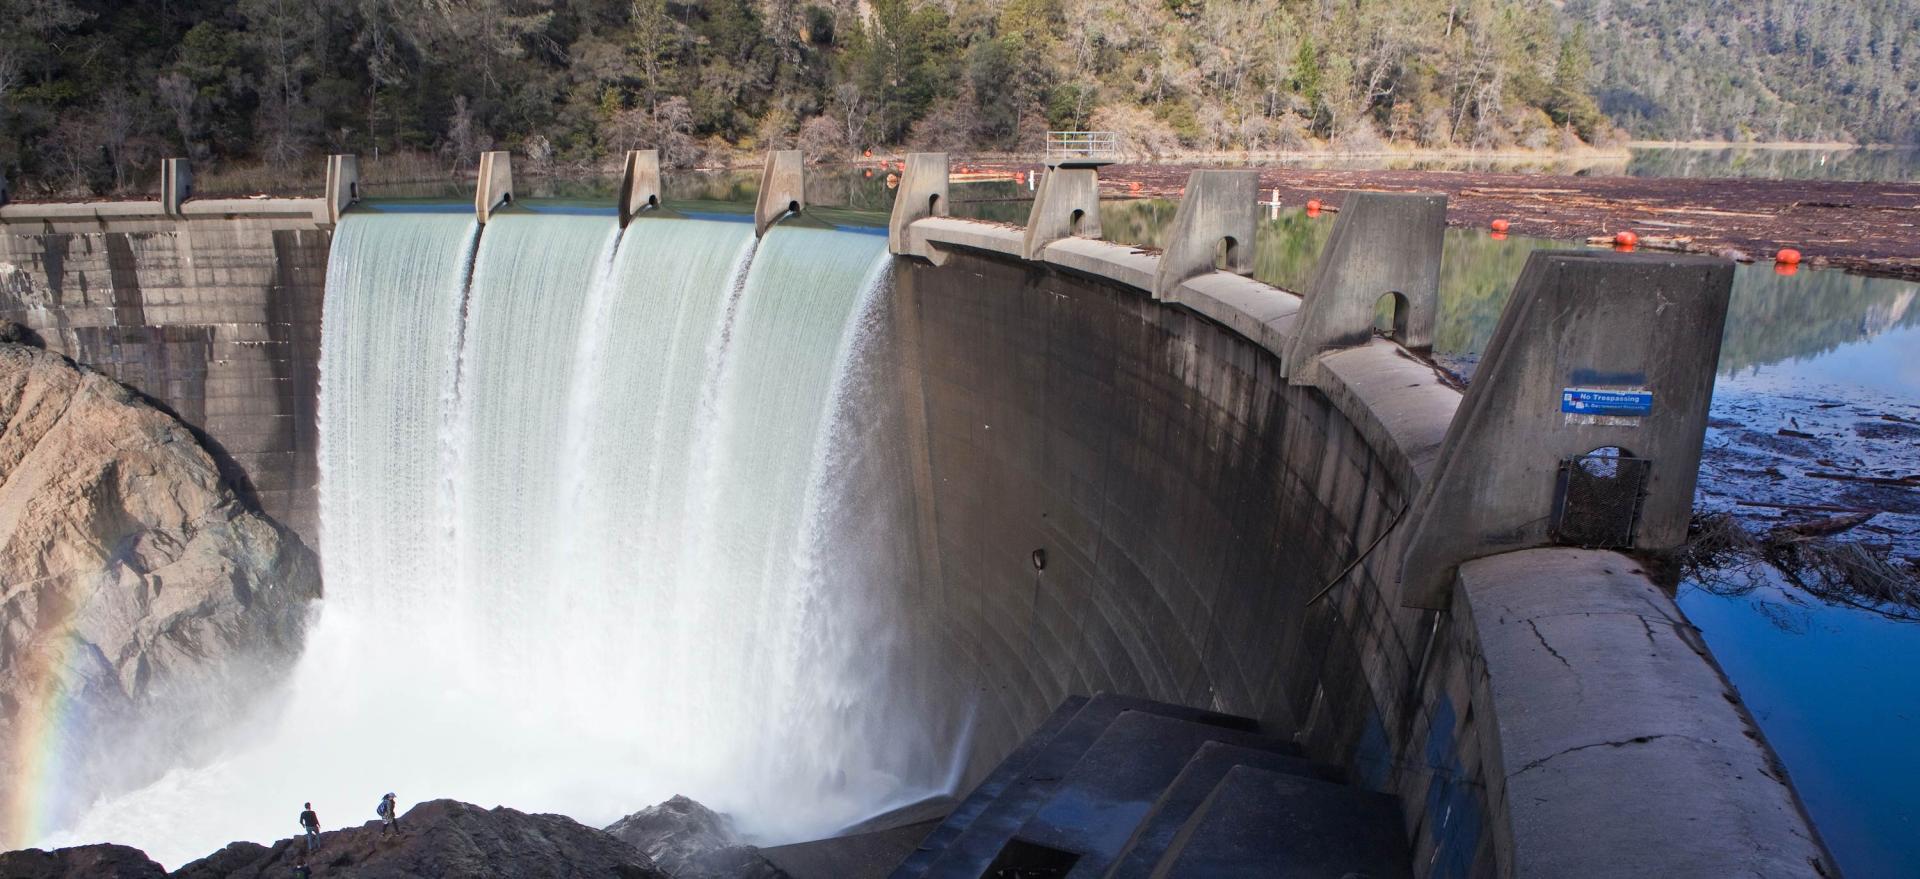 Lake Clementine Dam represents the impacts drought can have on water supply.